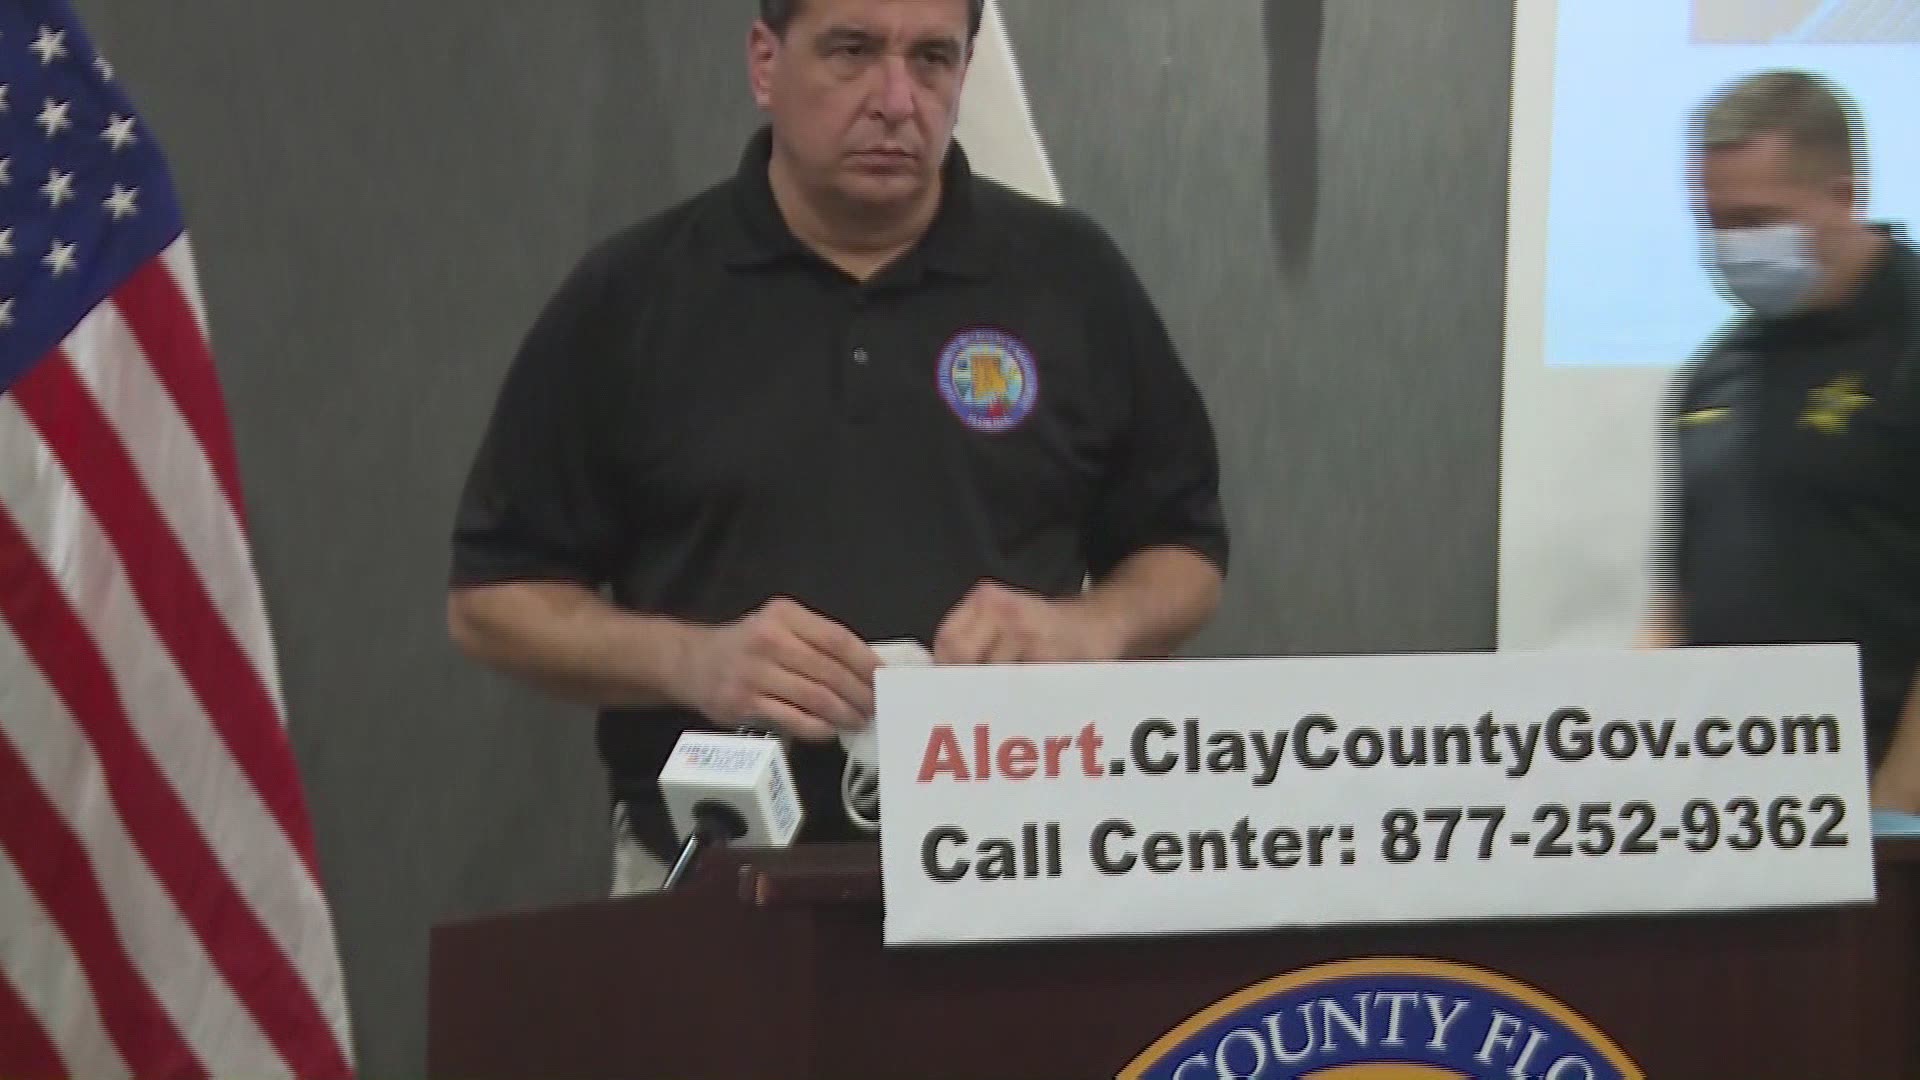 Clay County's director of emergency management along with the superintendent of Clay County Schools spoke about preparedness plans ahead of Tropical Storm Eta.